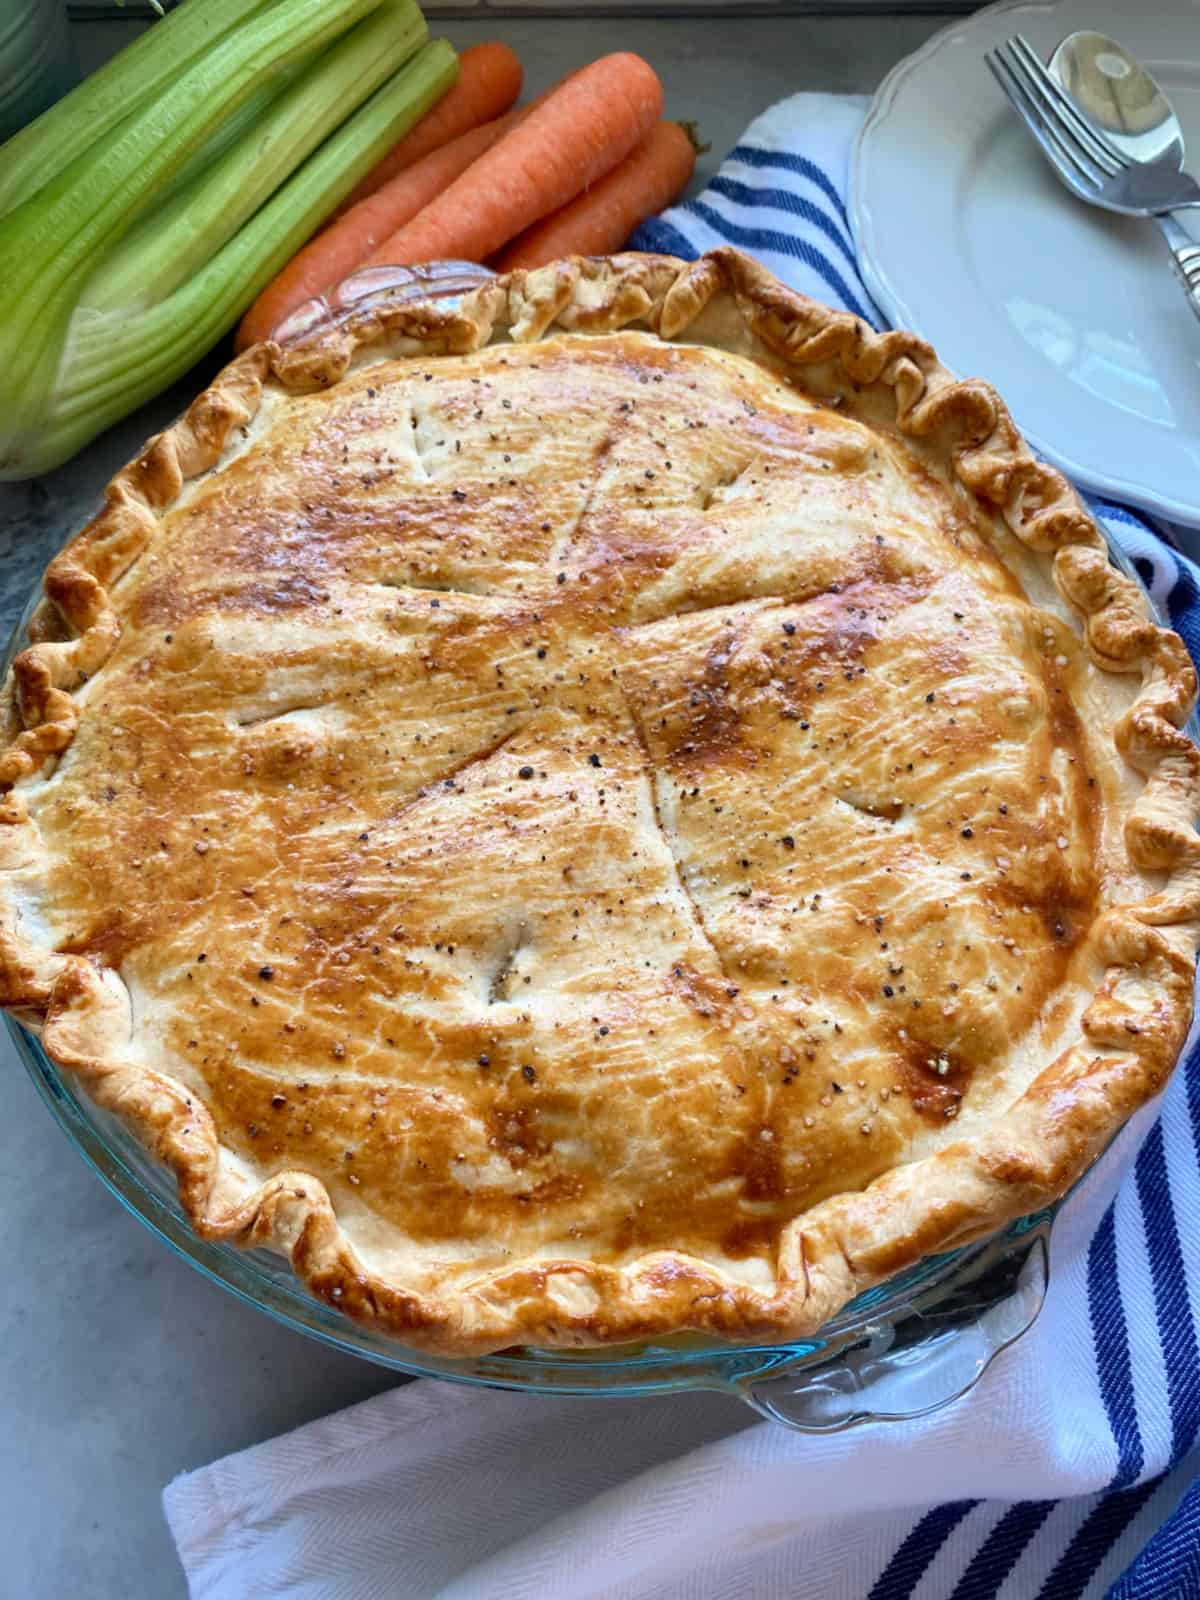 chicken pot pie on a blue and white striped cloth with celery, carrots, plate, fork, and spoon in the background